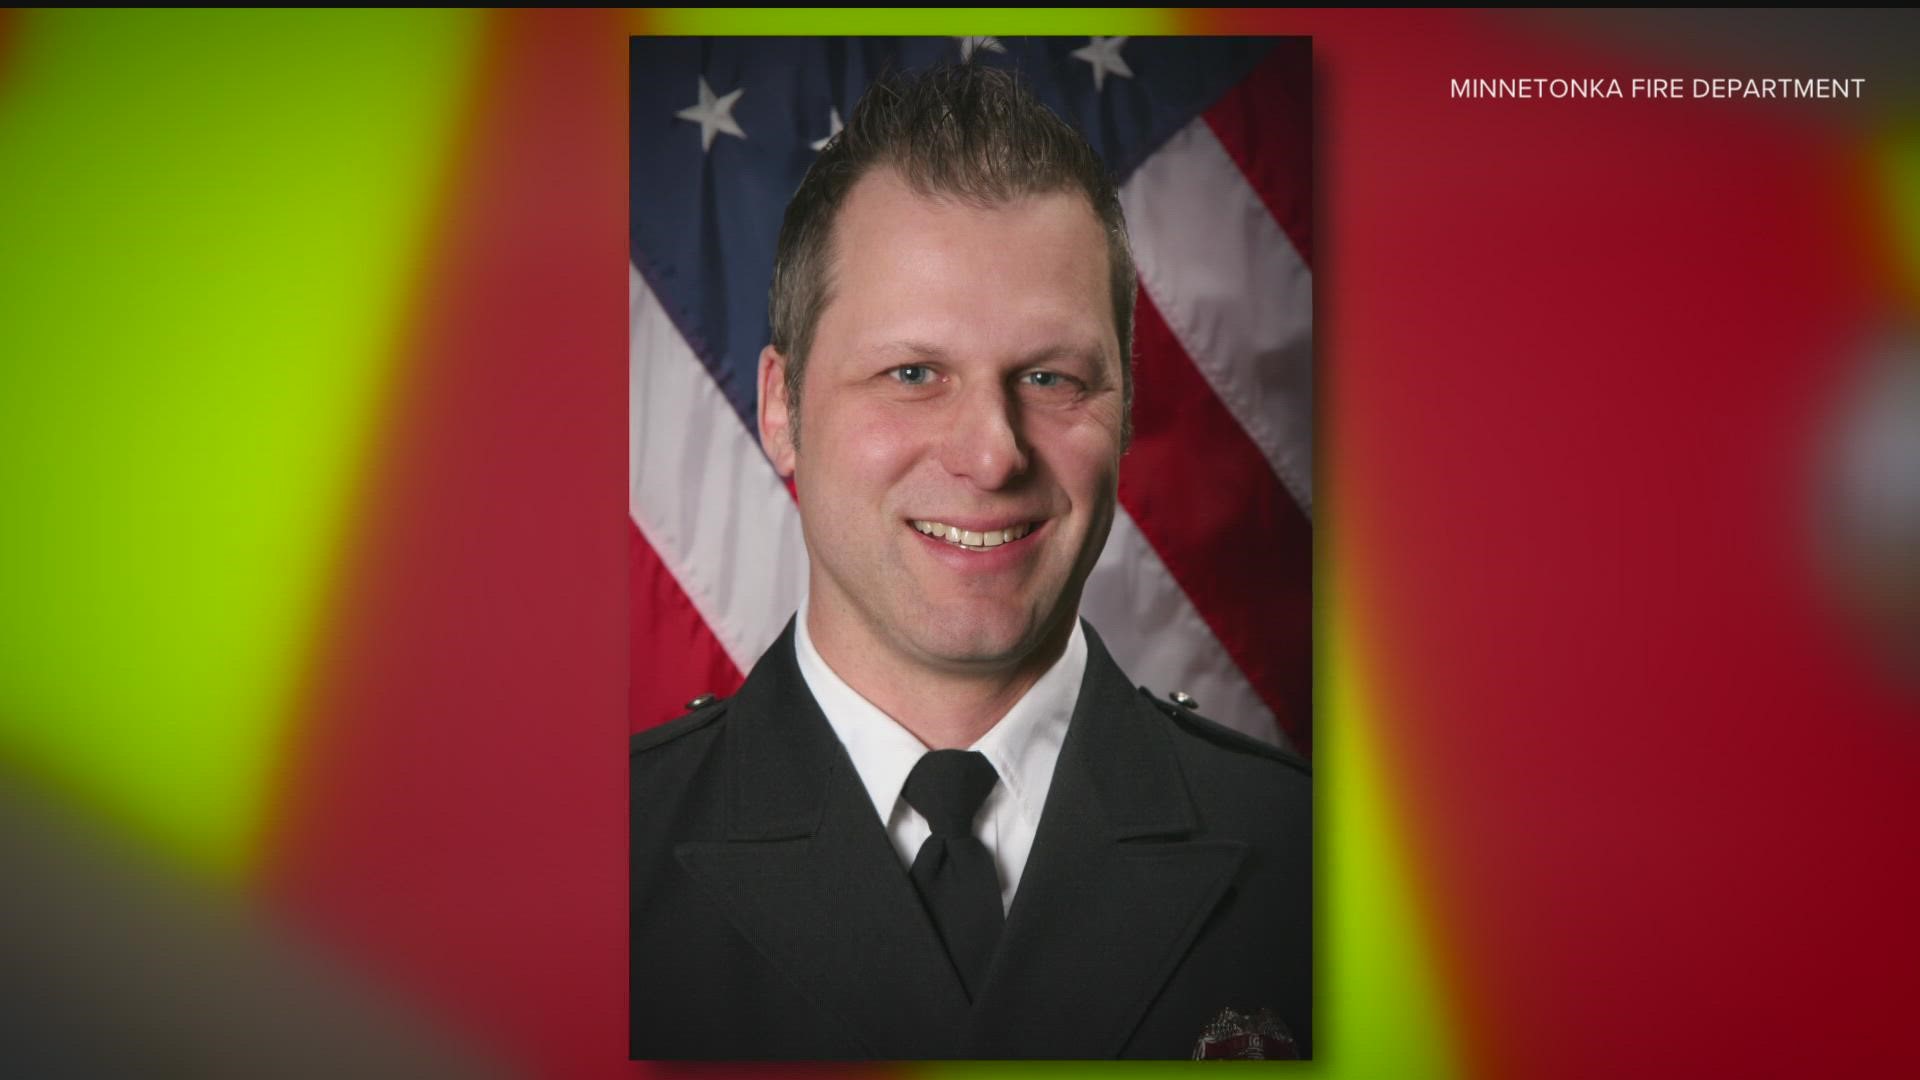 Firefighters say 14-year veteran Tim Tripp suffered a severe head injury Saturday morning and is currently in intensive care at a local hospital.